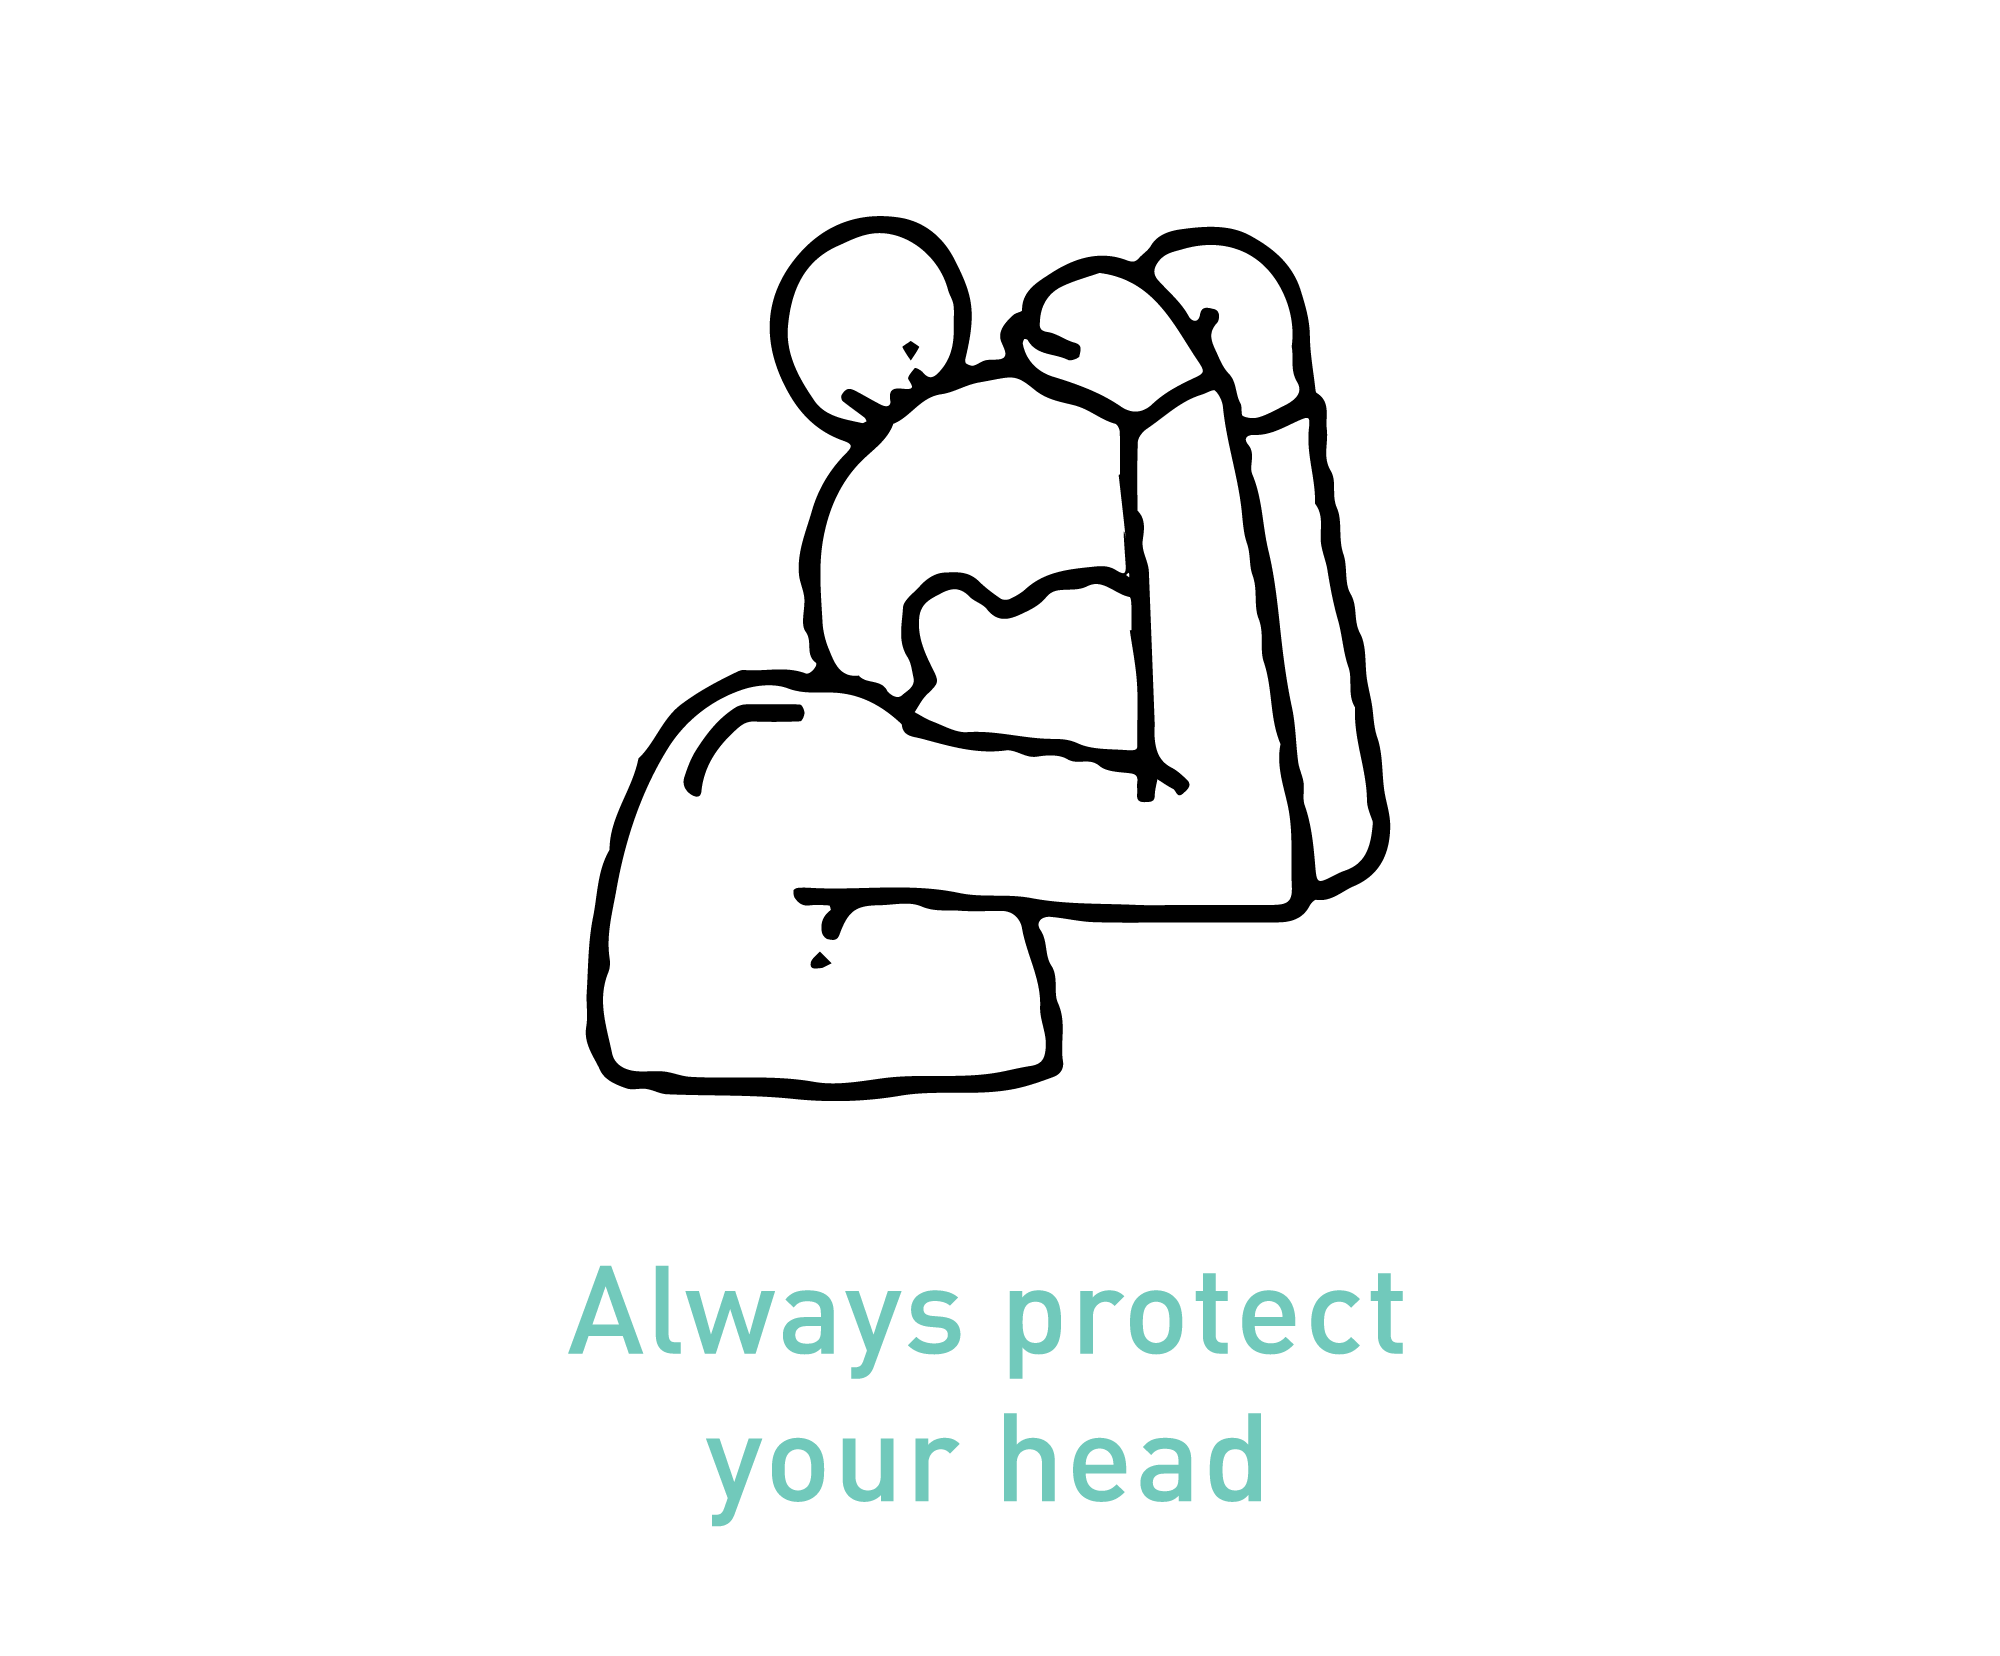 Illustration Protect Your Head